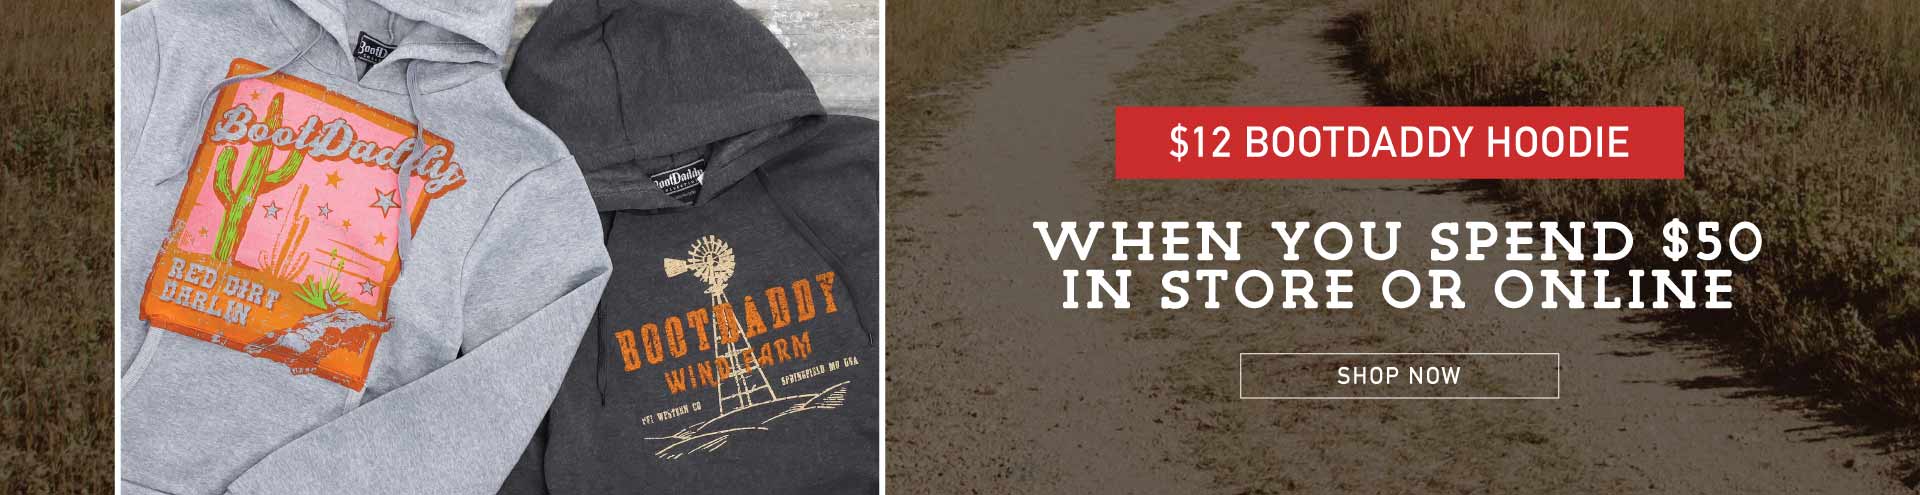 bootdaddy hoodie or tshirt for $12 when you spend $50